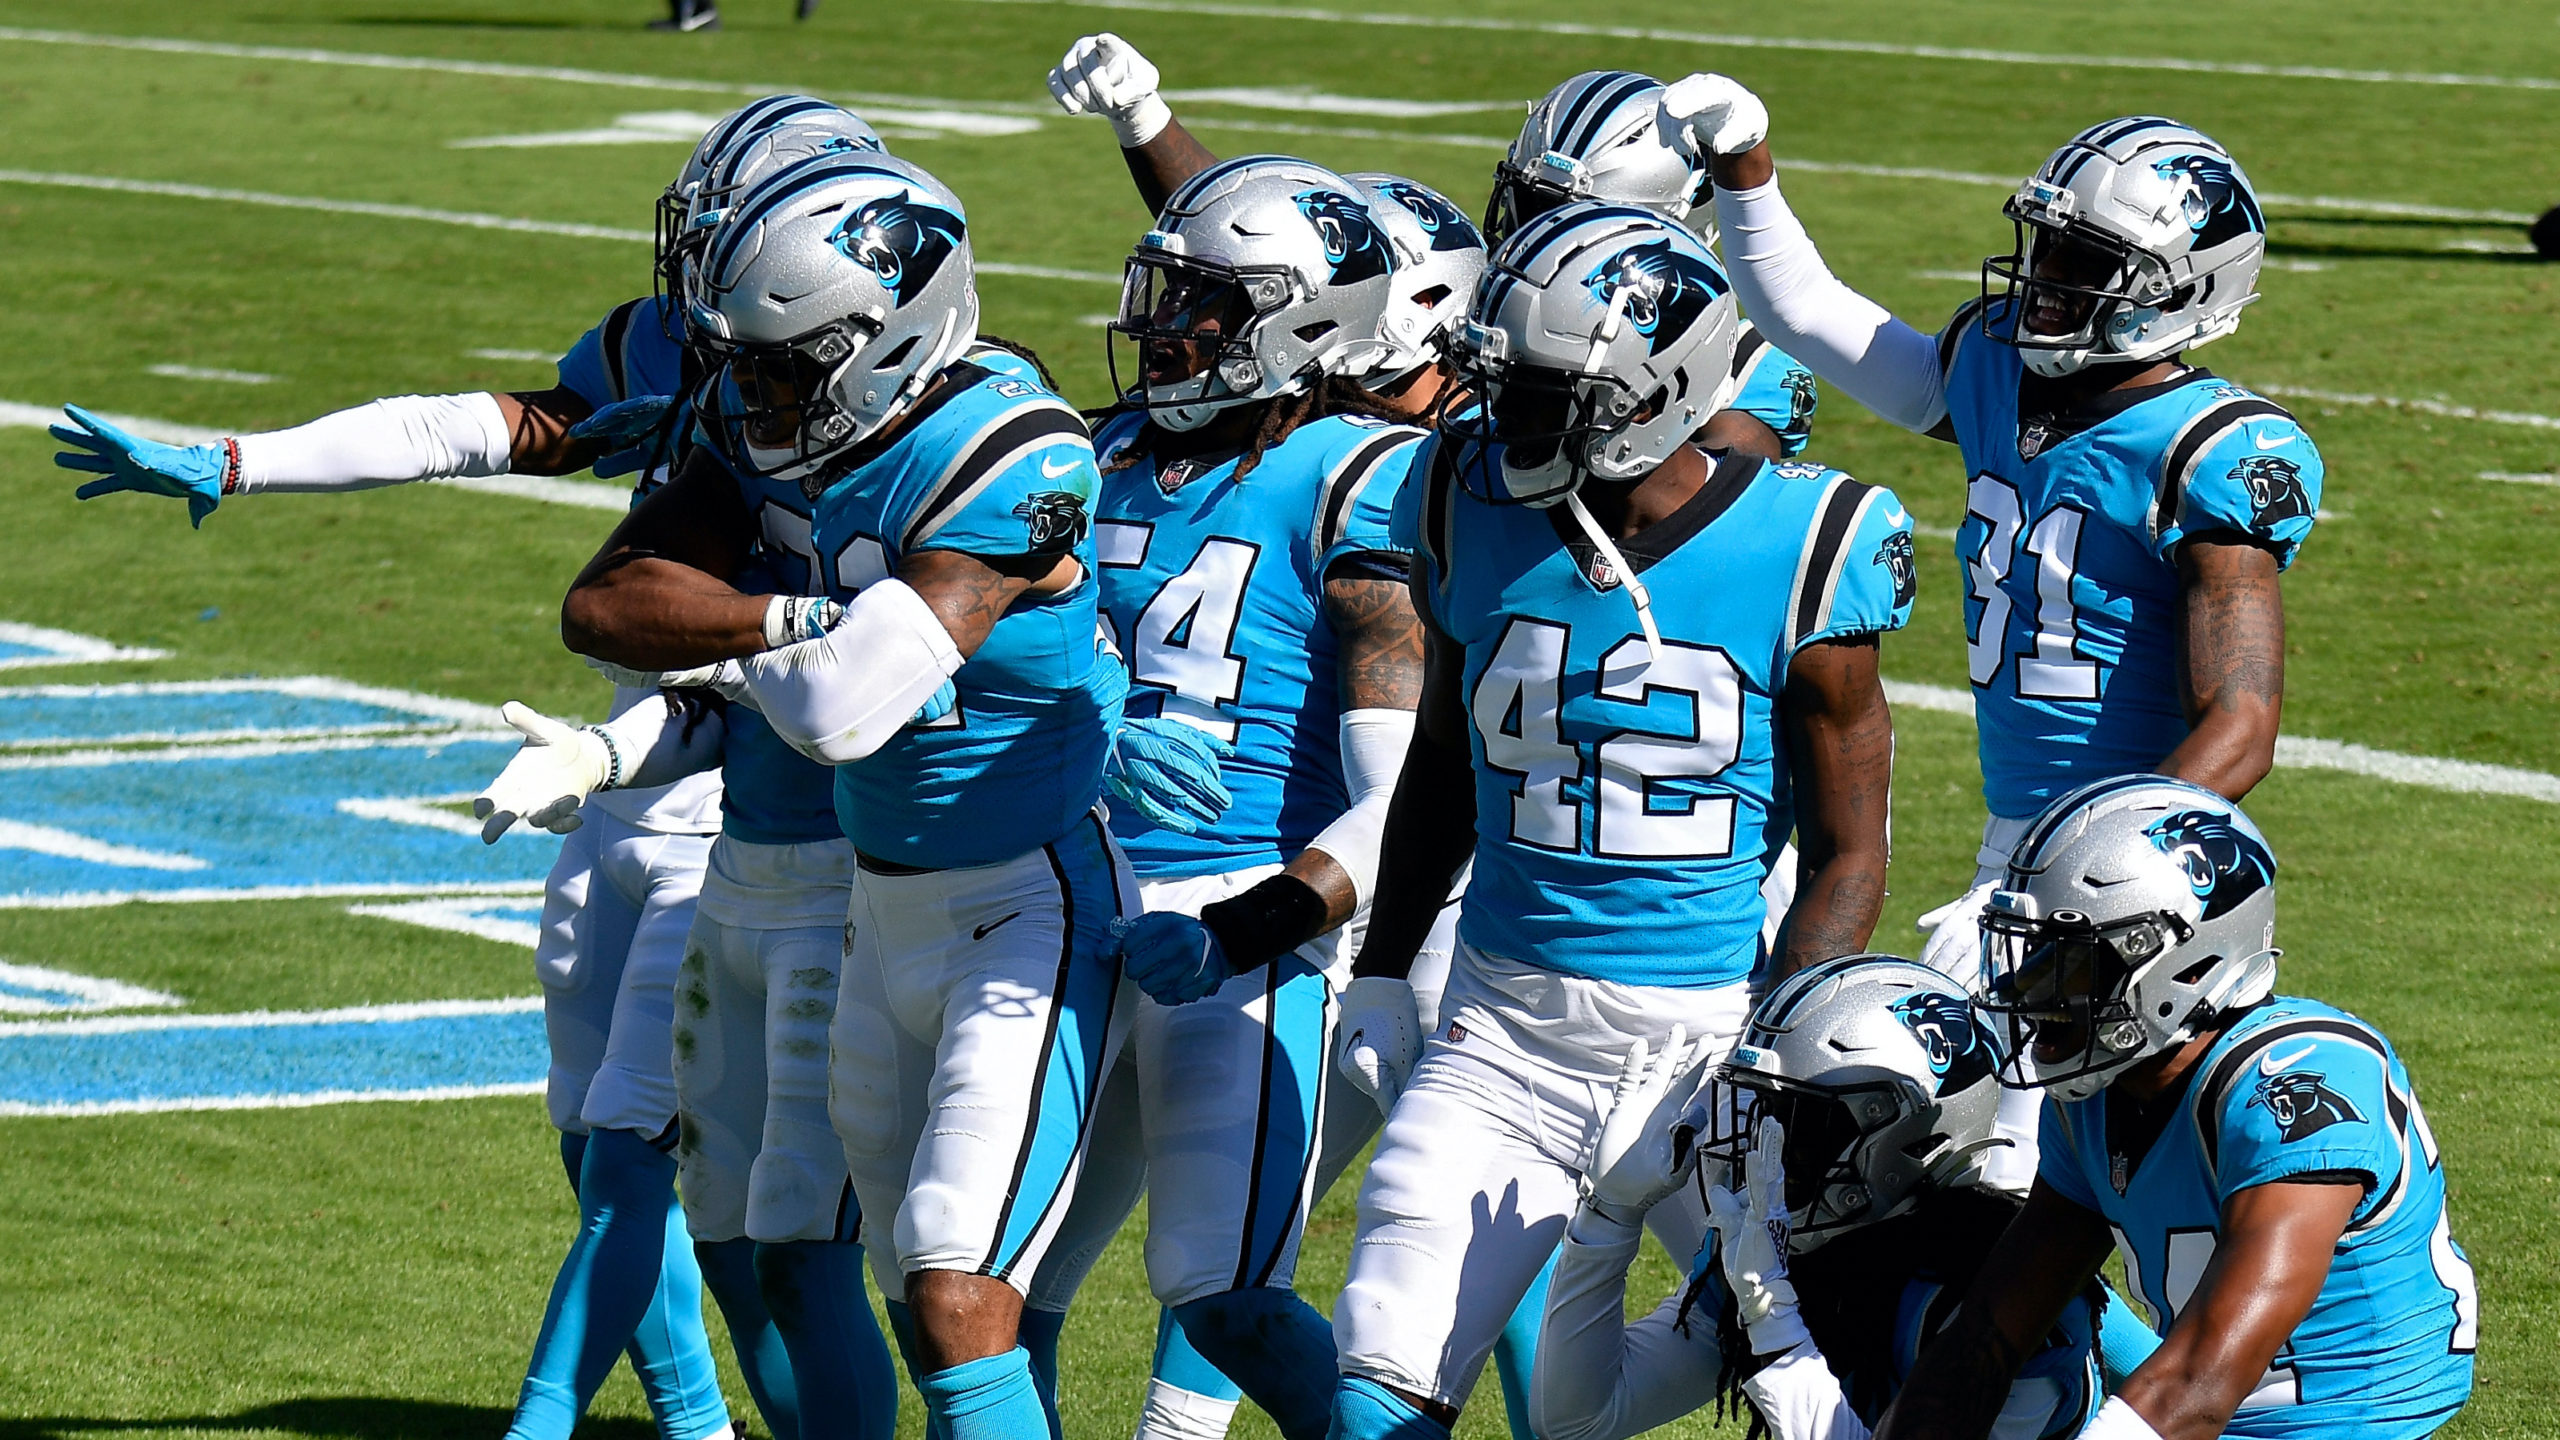 Freedman’s NFL Week 7 Trends & Early Bets: Panthers in Sweet Spot as Divisional Underdogs article feature image